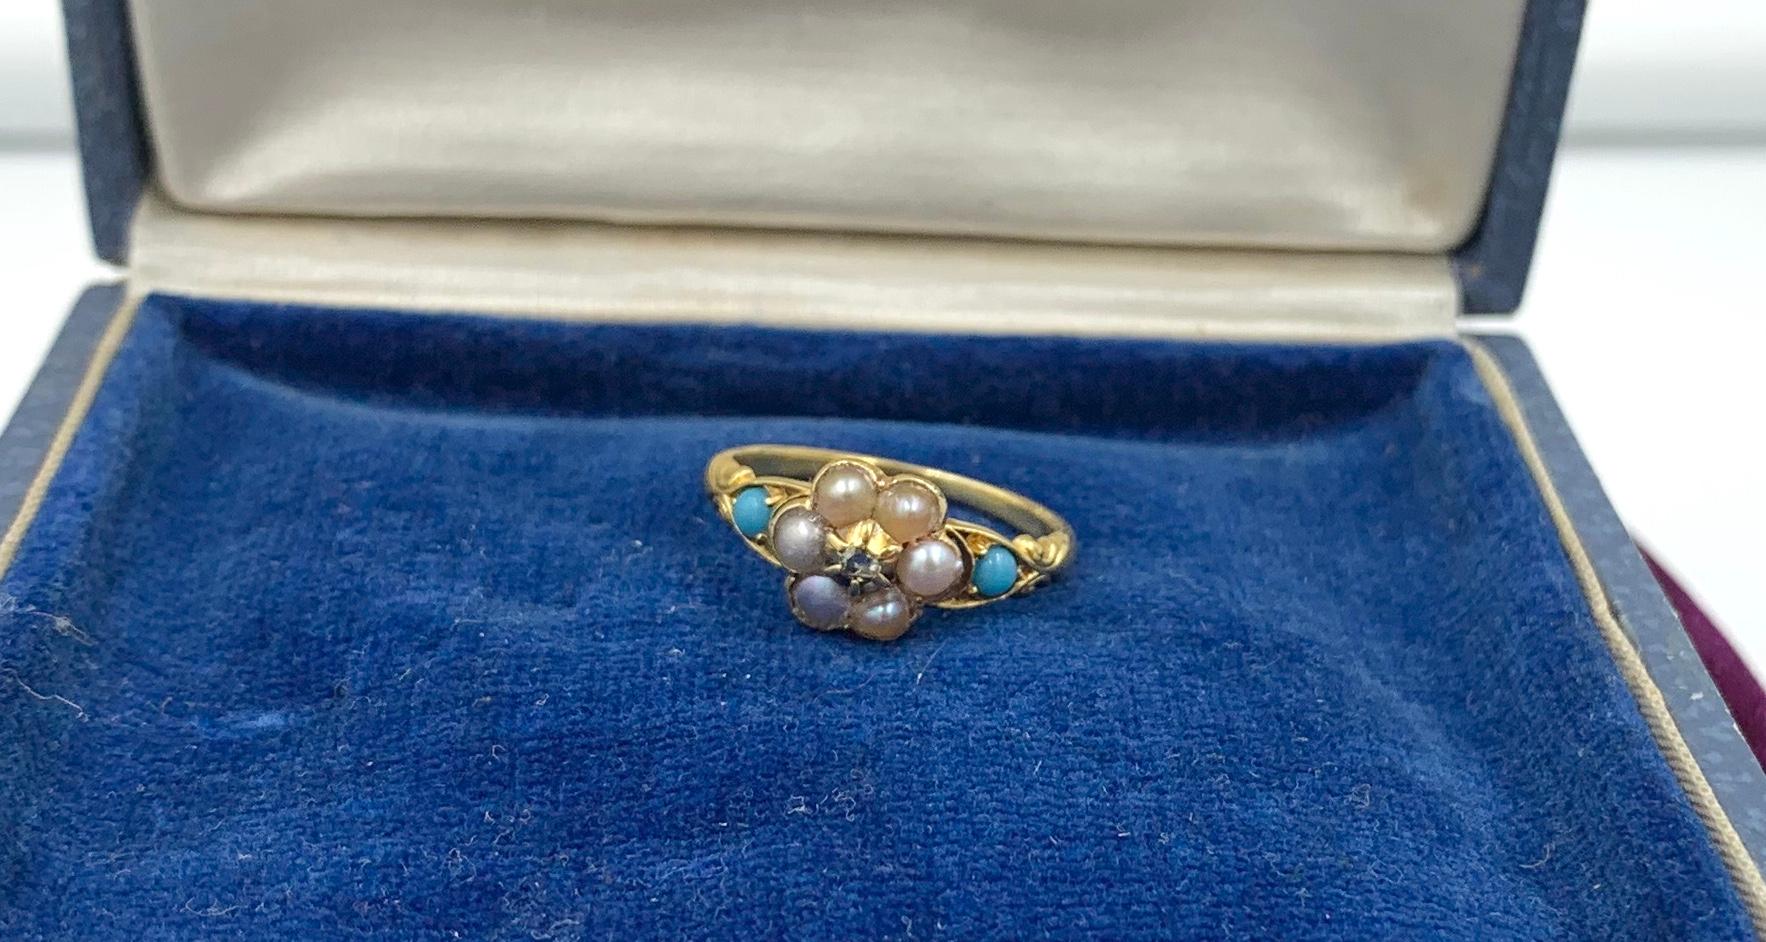 An stunning and oh so Romantic Antique Victorian Ring with a Rose Cut Diamond, a halo of Pearls and two Persian Turquoise gems. The combination of Diamond, Pearls and Turquoise in this beautifully made ring is an absolute delight.  The Rose Cut